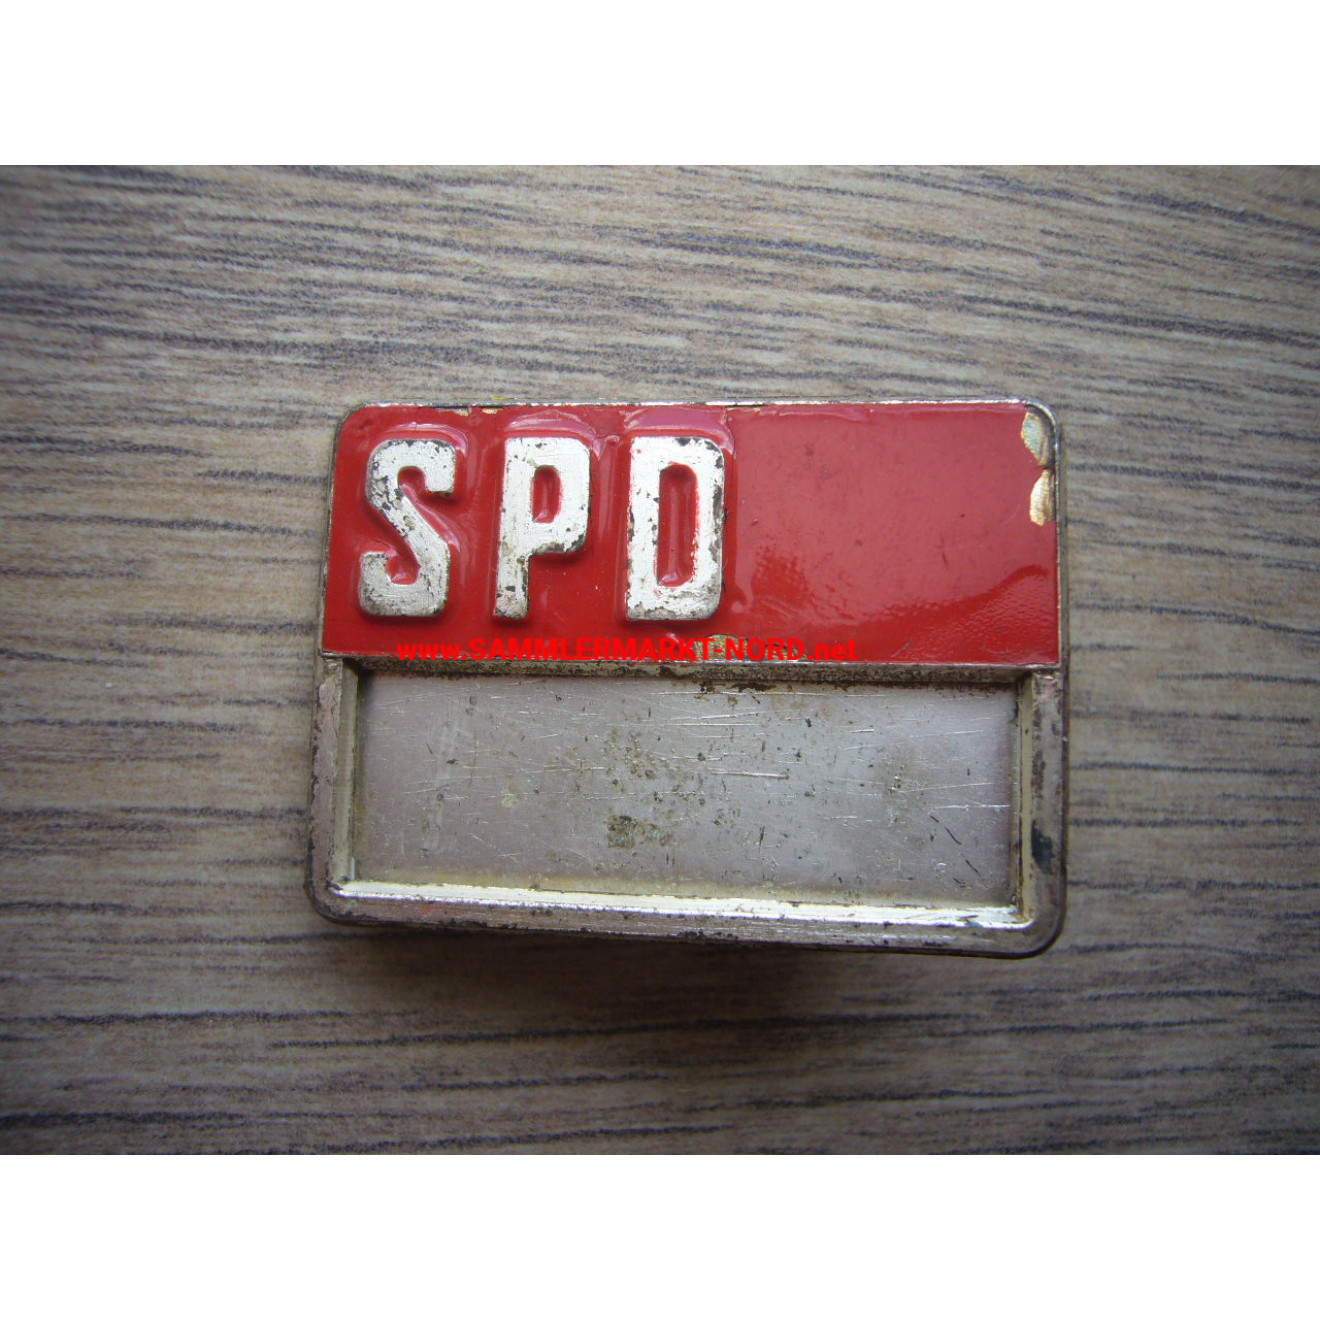 SPD Social Democratic Party of Germany - old name badge